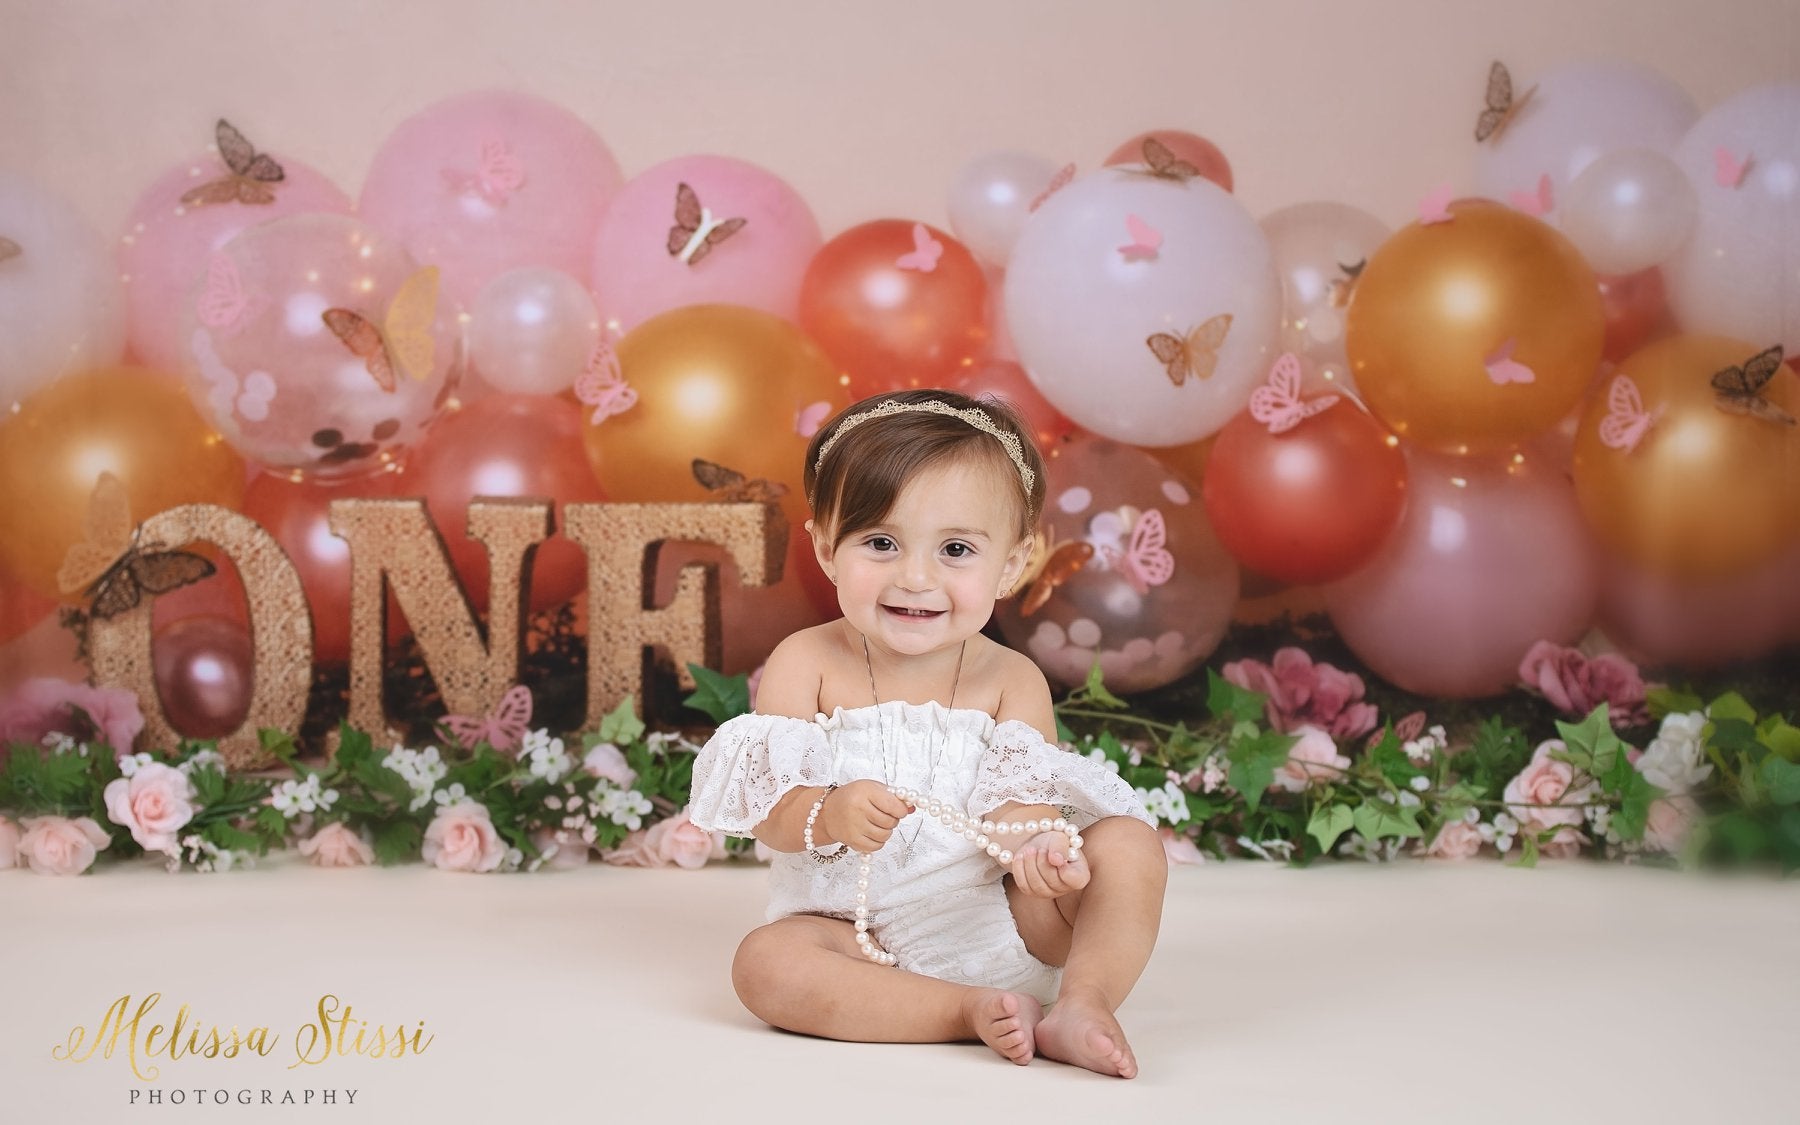 Kate 1st Birthday Balloon with Butterfly Backdrop Designed by Cassie Christiansen